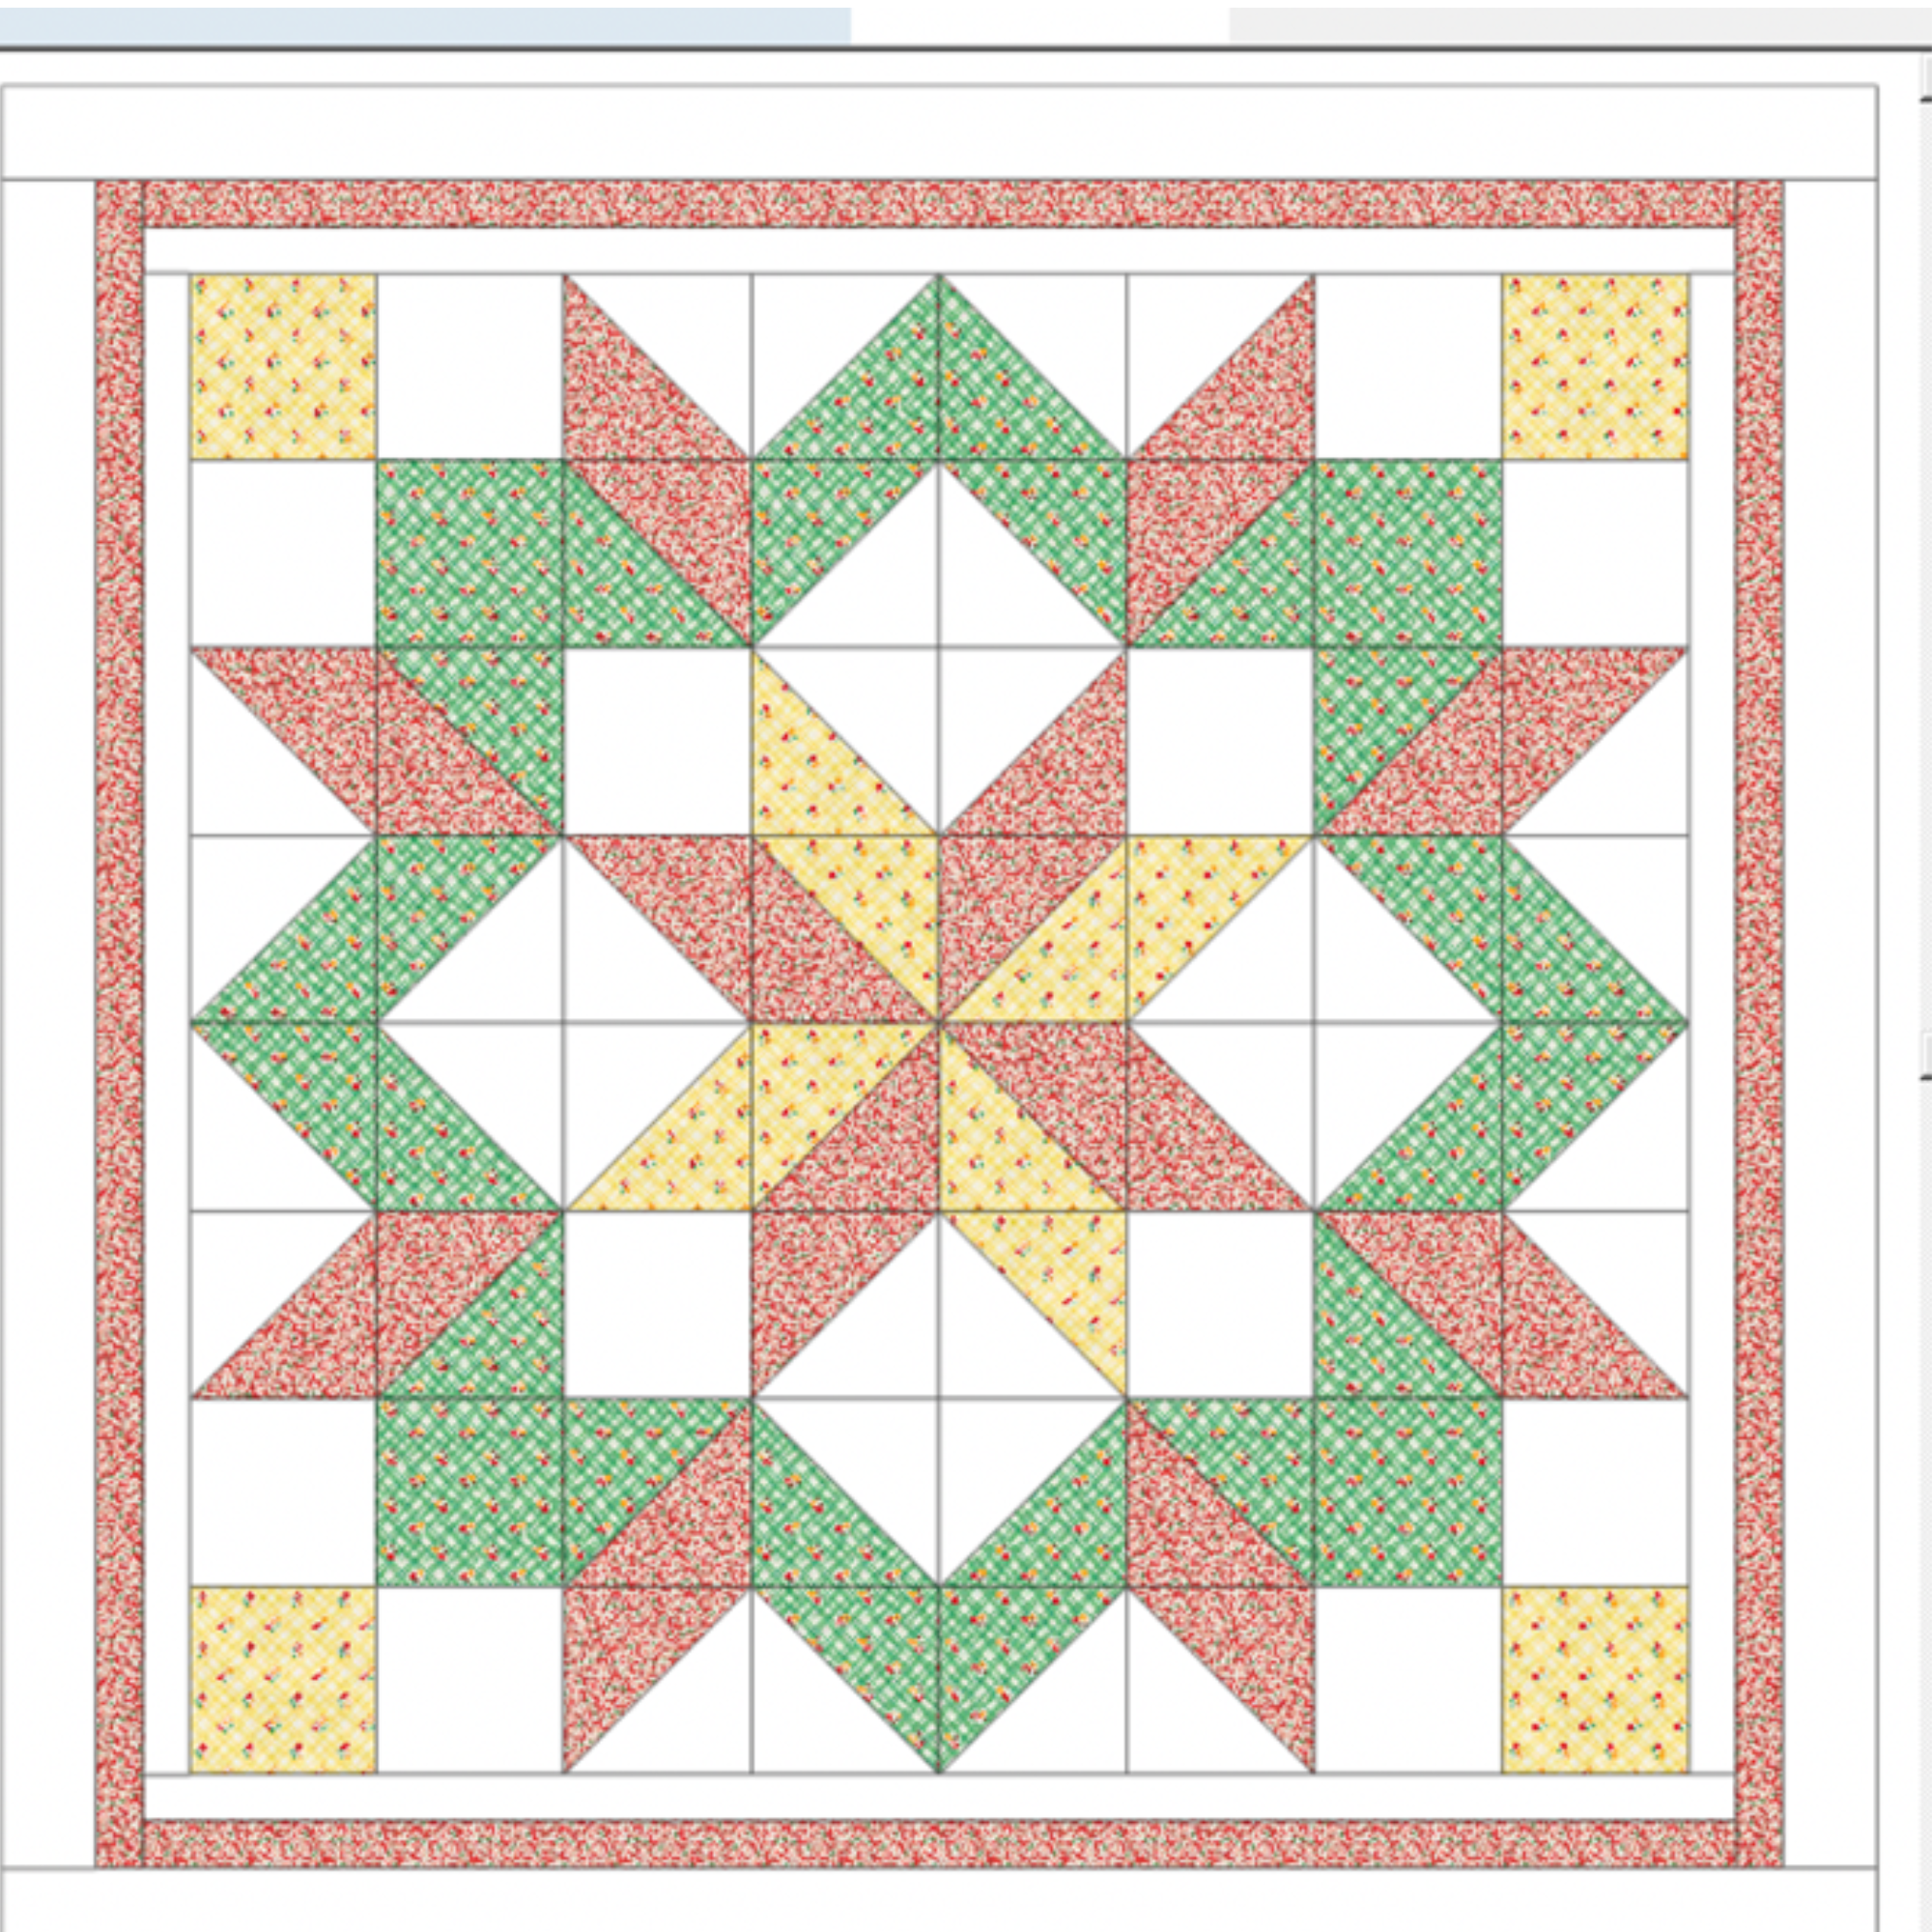 Photo of a quilt pattern in a star pattern.